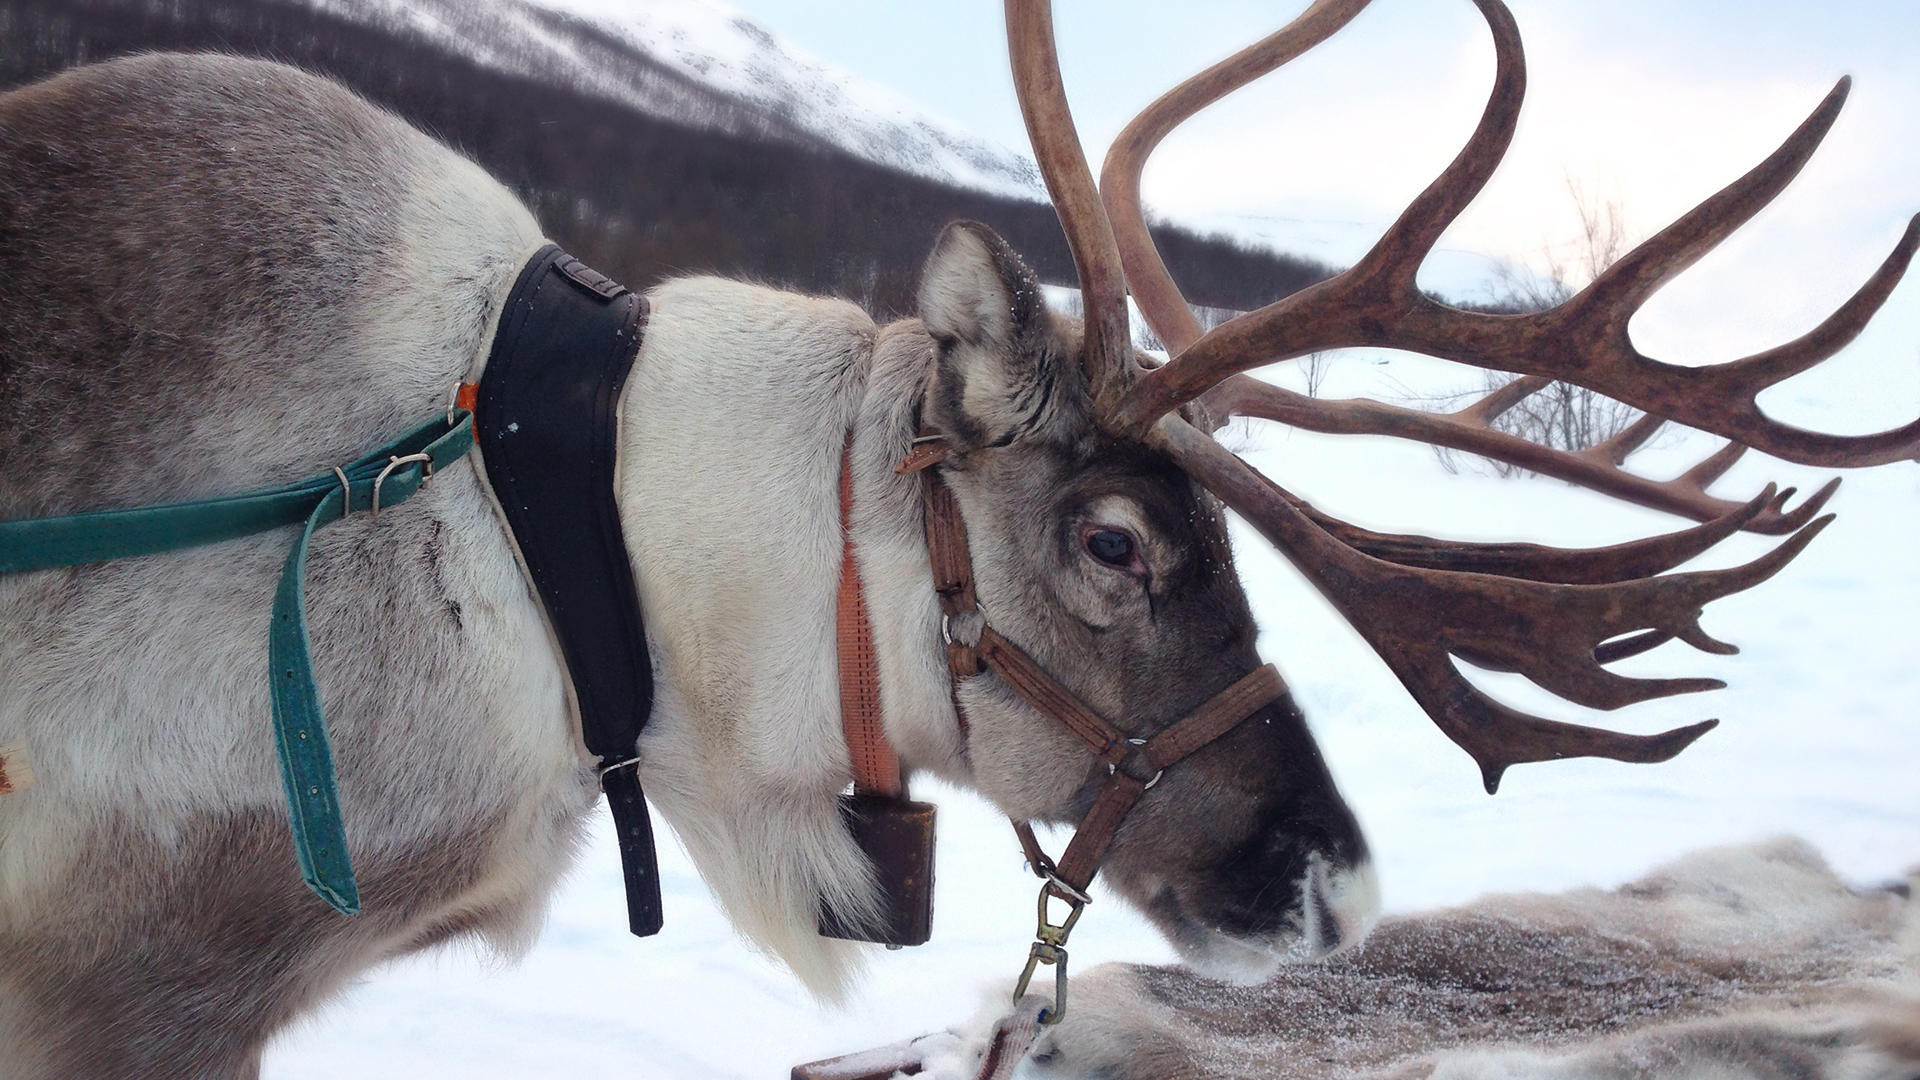 Close up of a reindeer in profile, with large antlers and wearing a harness